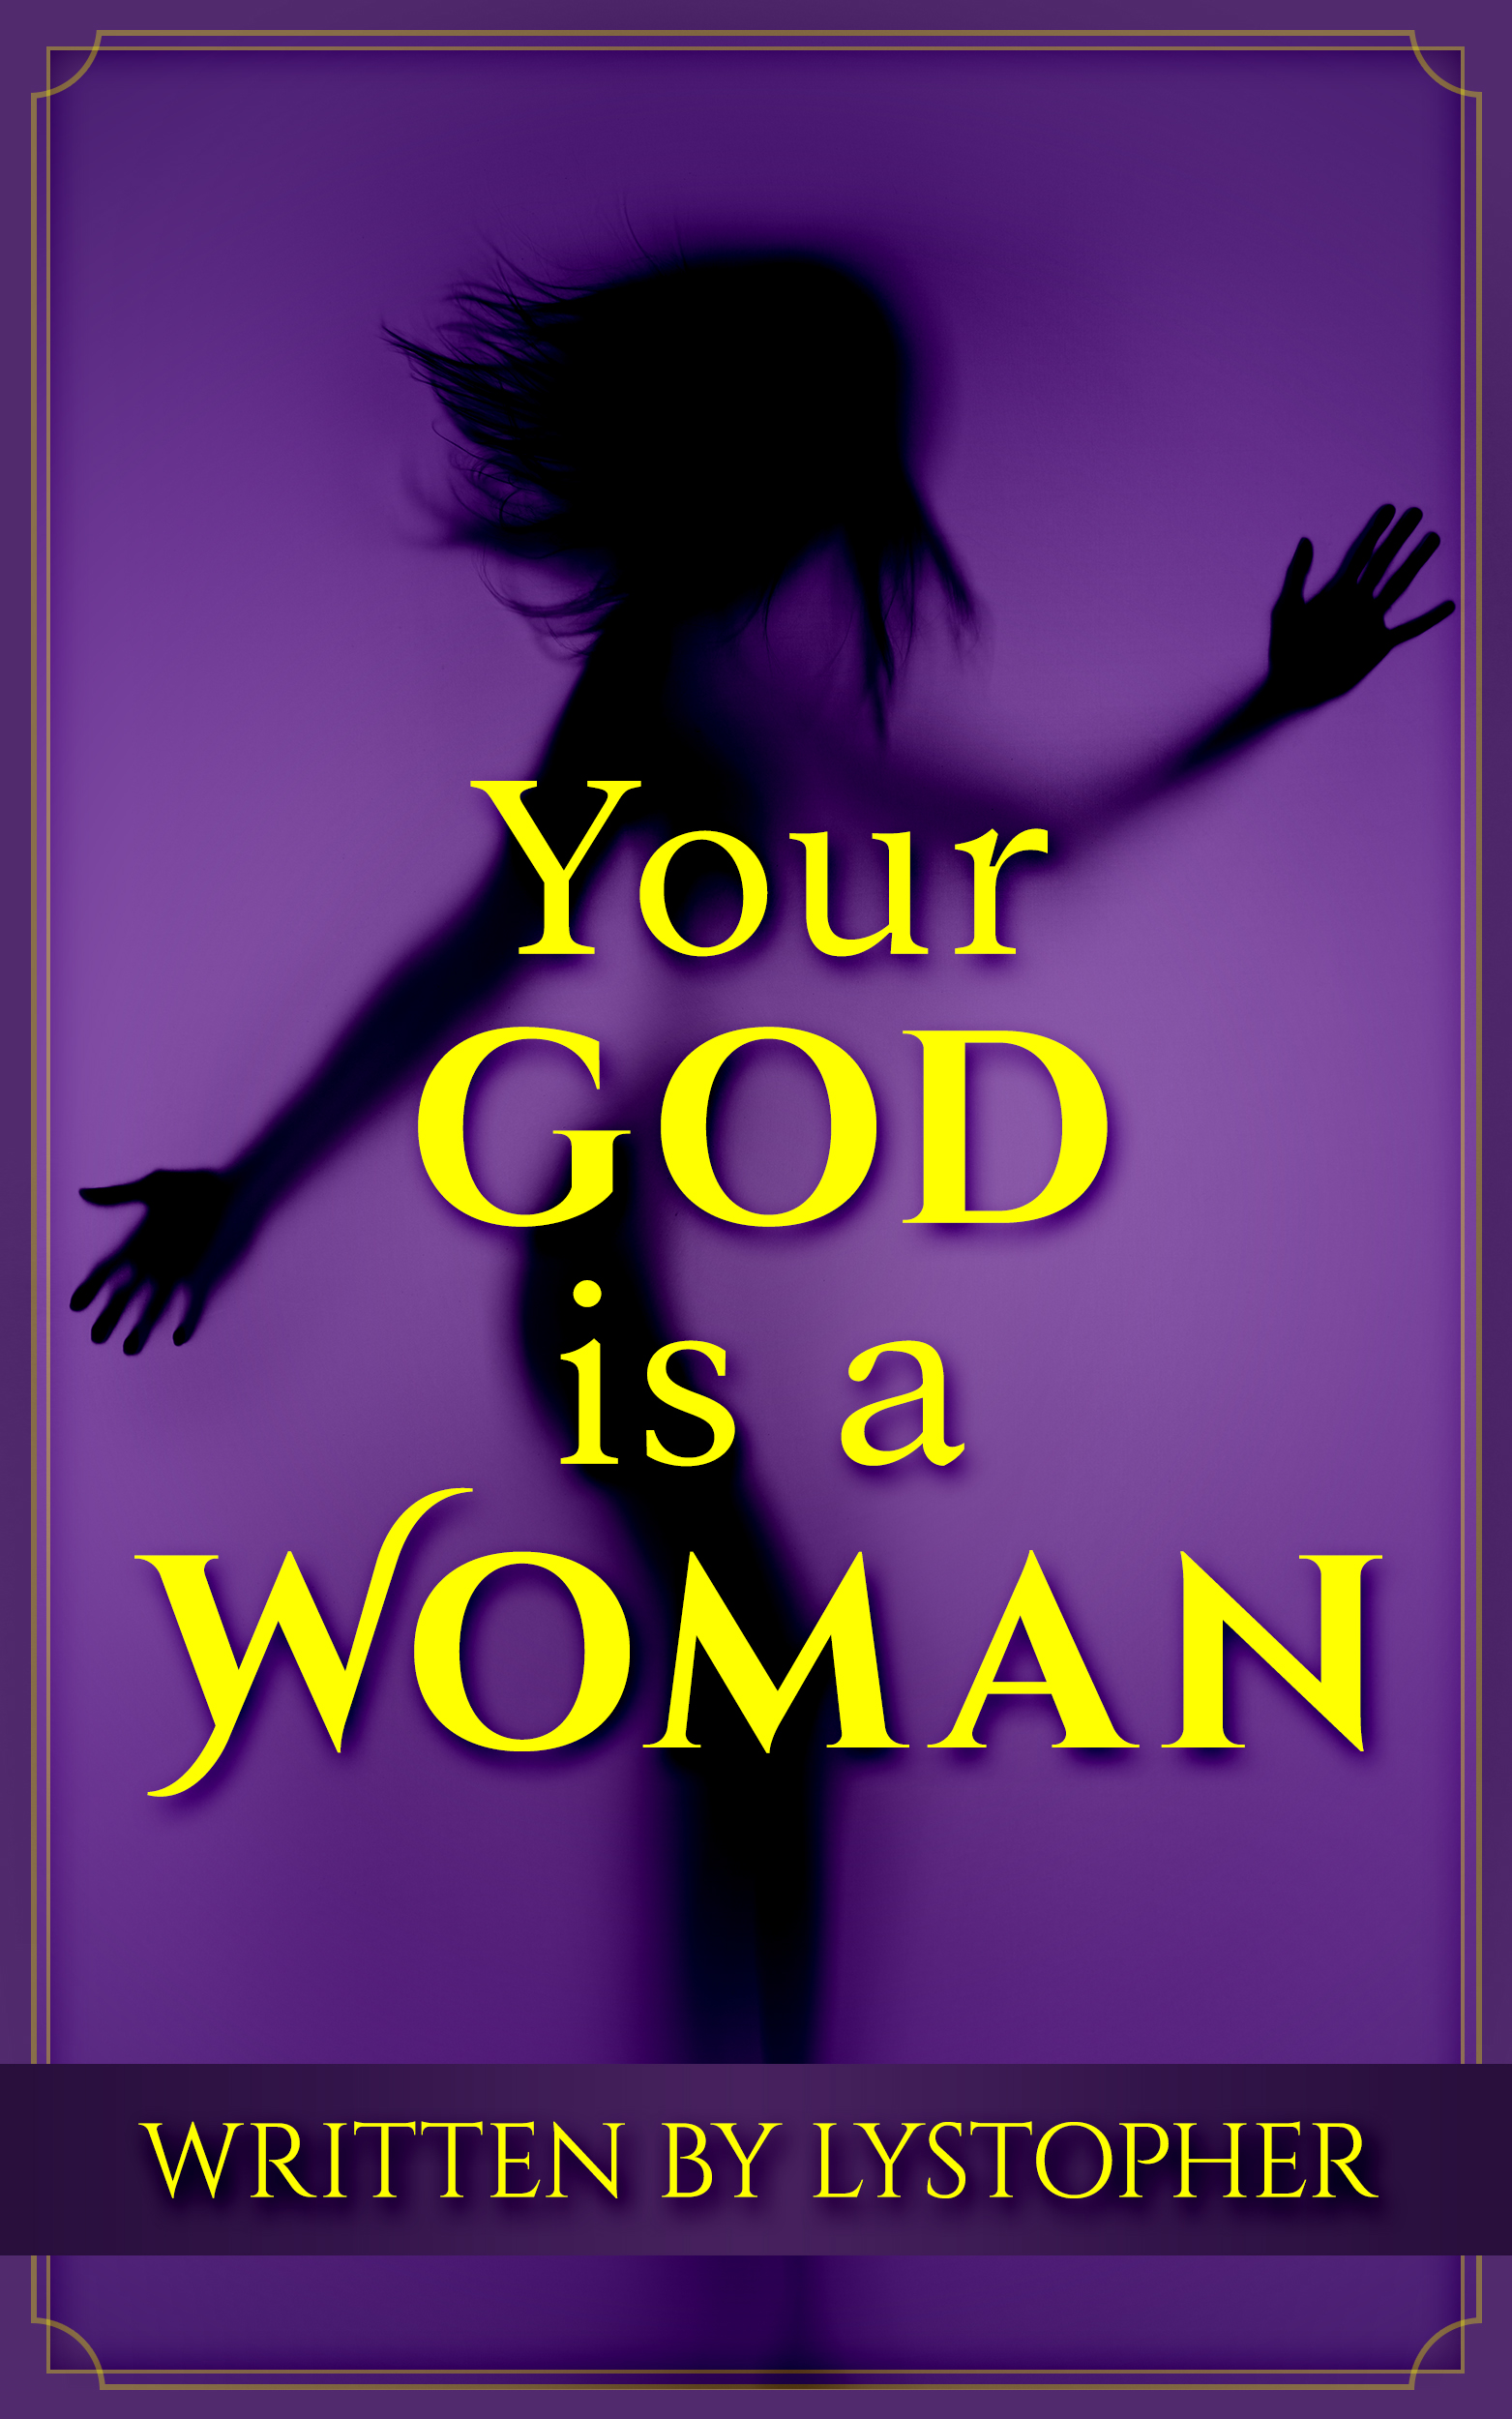 FREE: Your GOD is a WOMAN by Lystopher